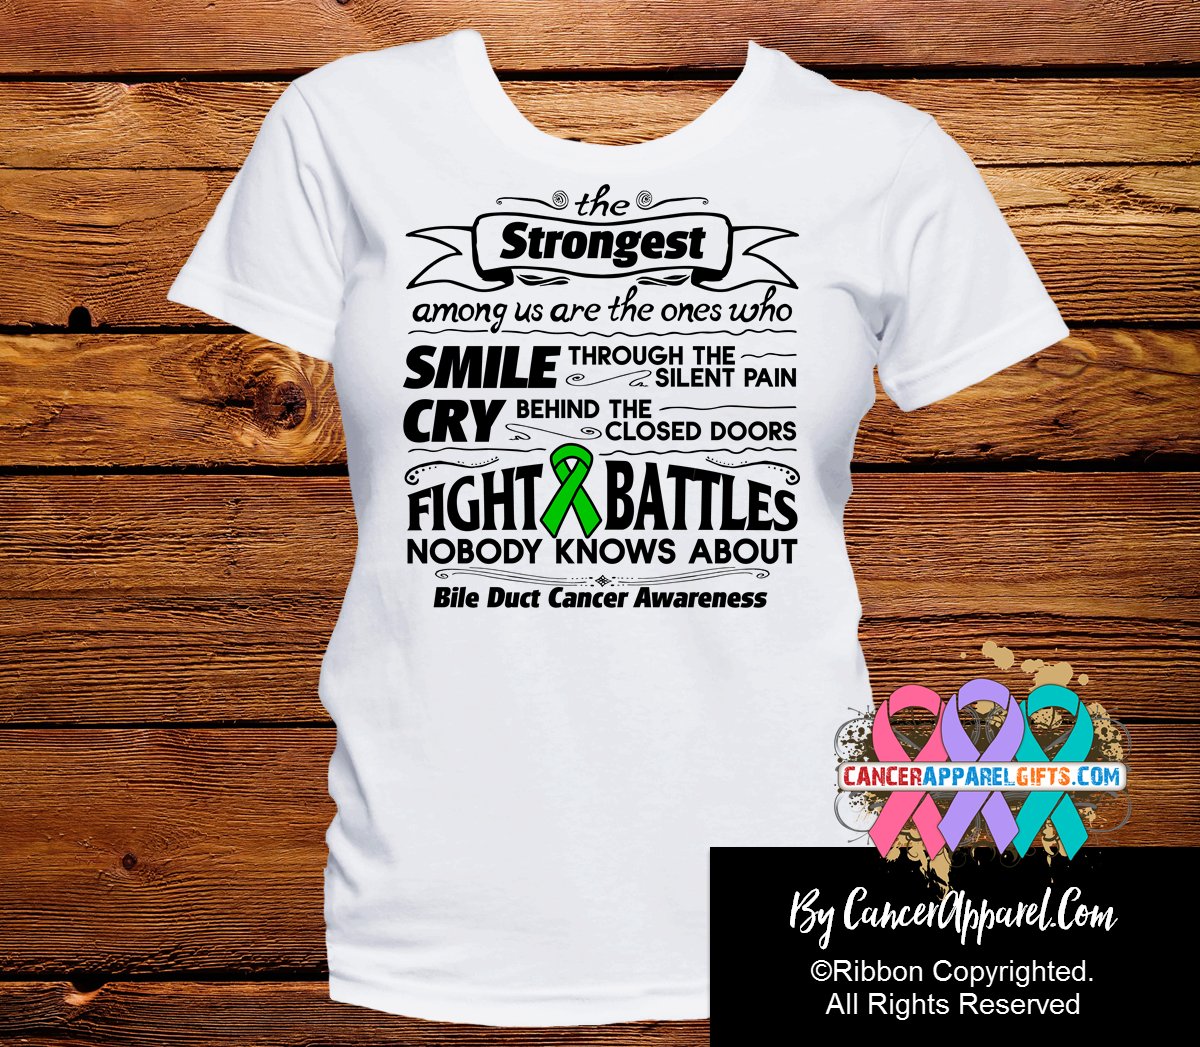 Bile Duct Cancer The Strongest Among Us Shirts - Cancer Apparel and Gifts